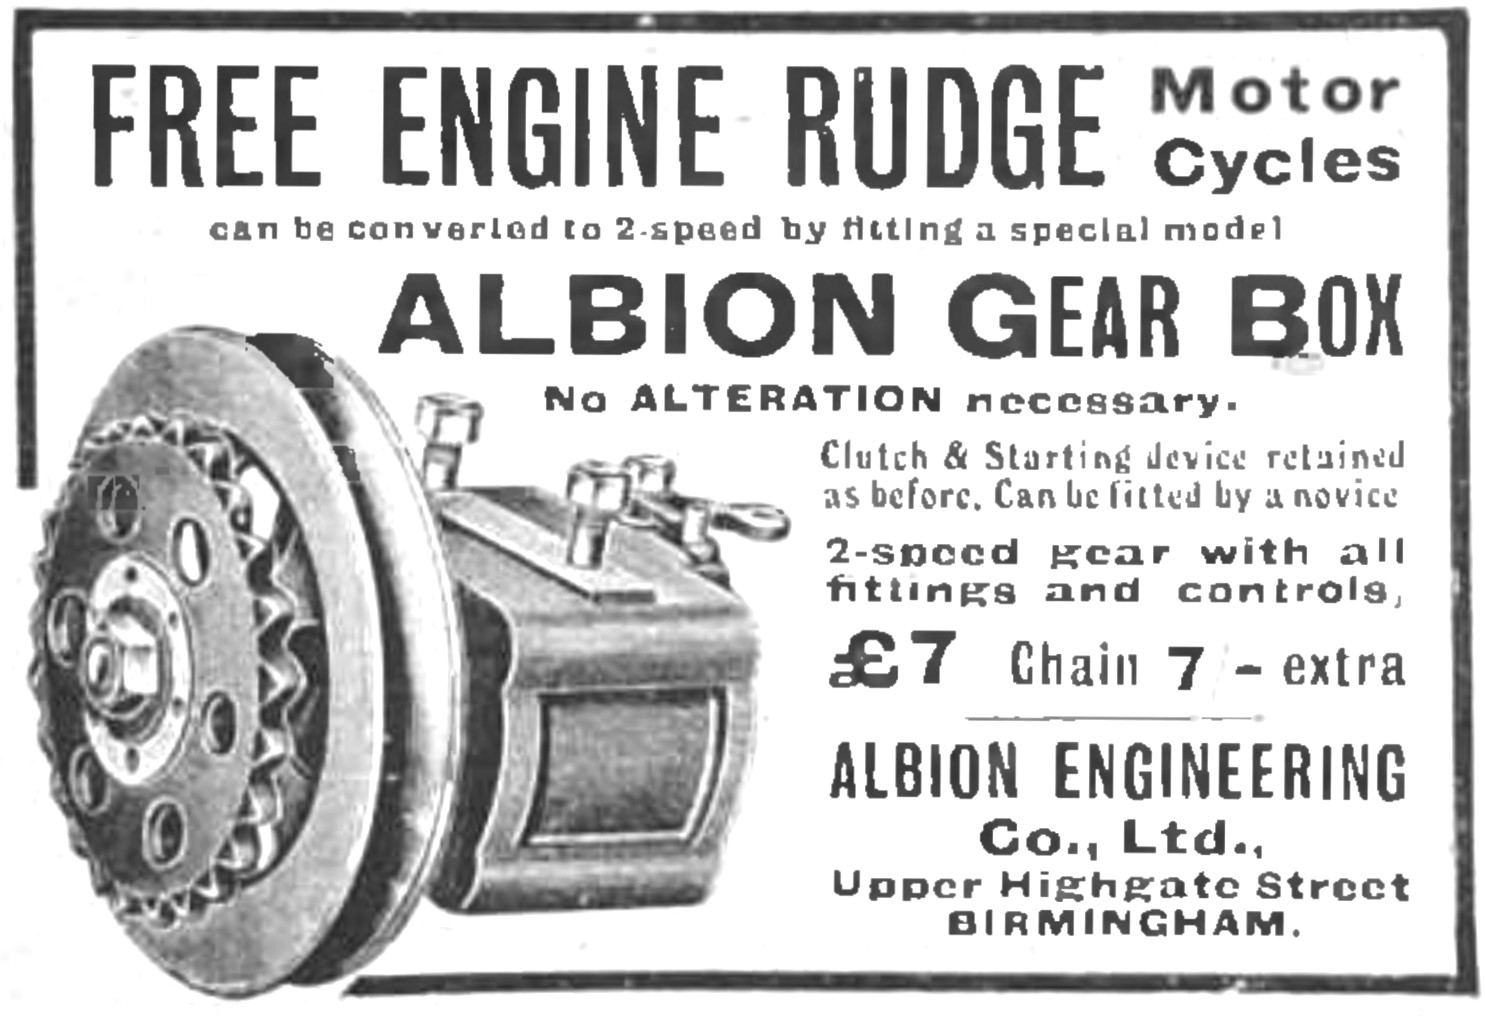 Albion Gear Box For Free Engine Rudge Motor Cycles 1915          